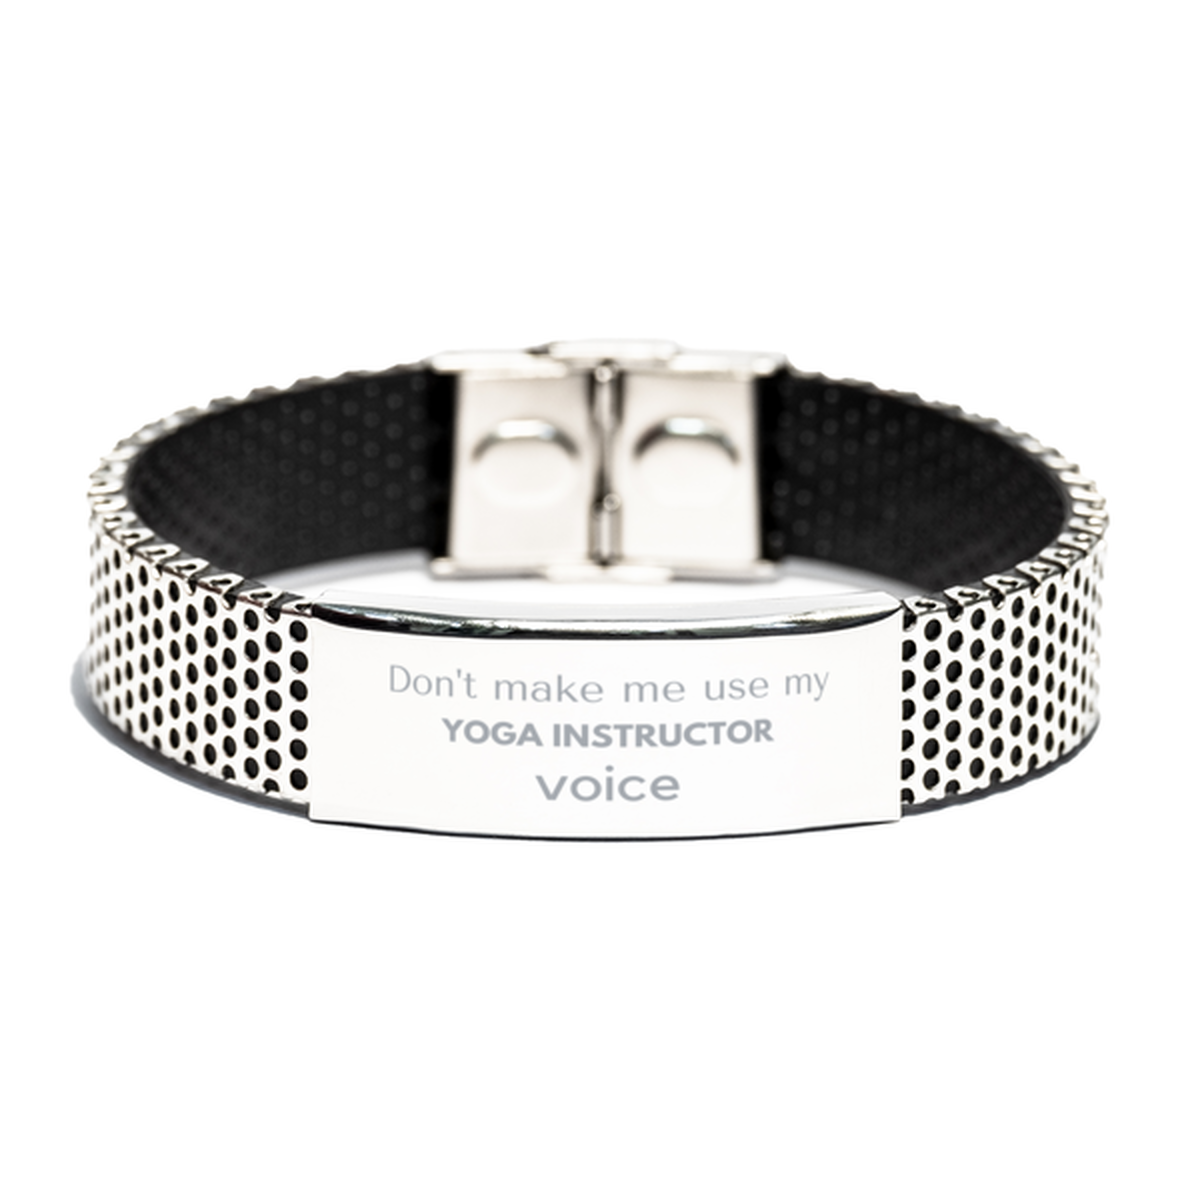 Don't make me use my Yoga Instructor voice, Sarcasm Yoga Instructor Gifts, Christmas Yoga Instructor Stainless Steel Bracelet Birthday Unique Gifts For Yoga Instructor Coworkers, Men, Women, Colleague, Friends